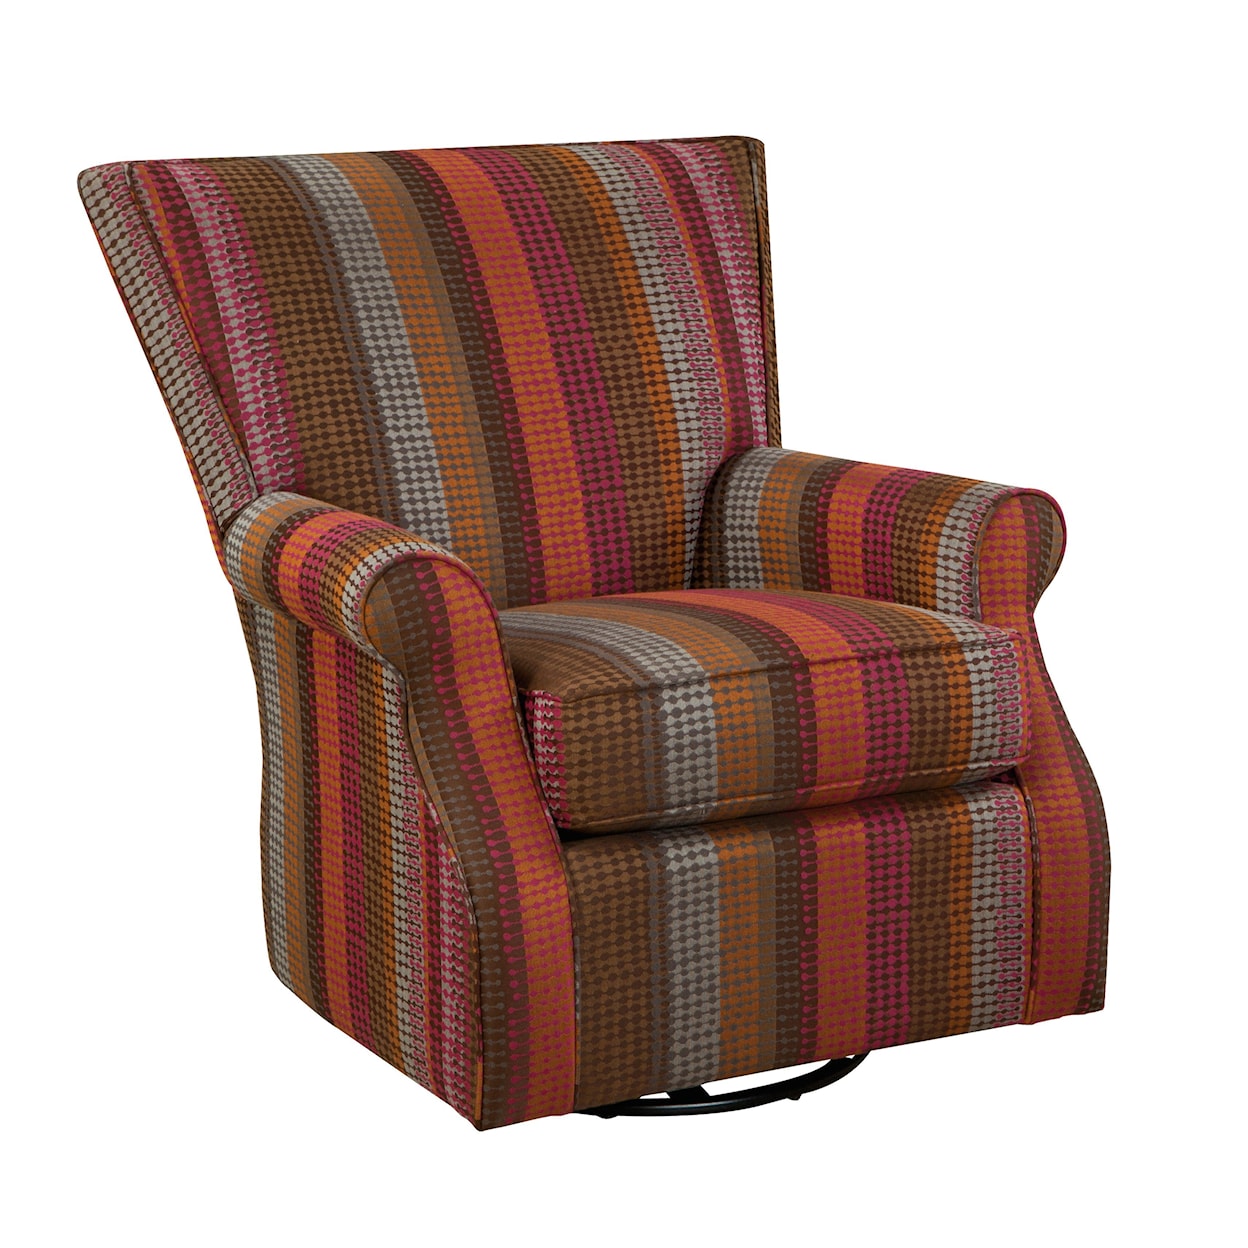 Hickory Craft Swivel Chairs Swivel Glider Chair